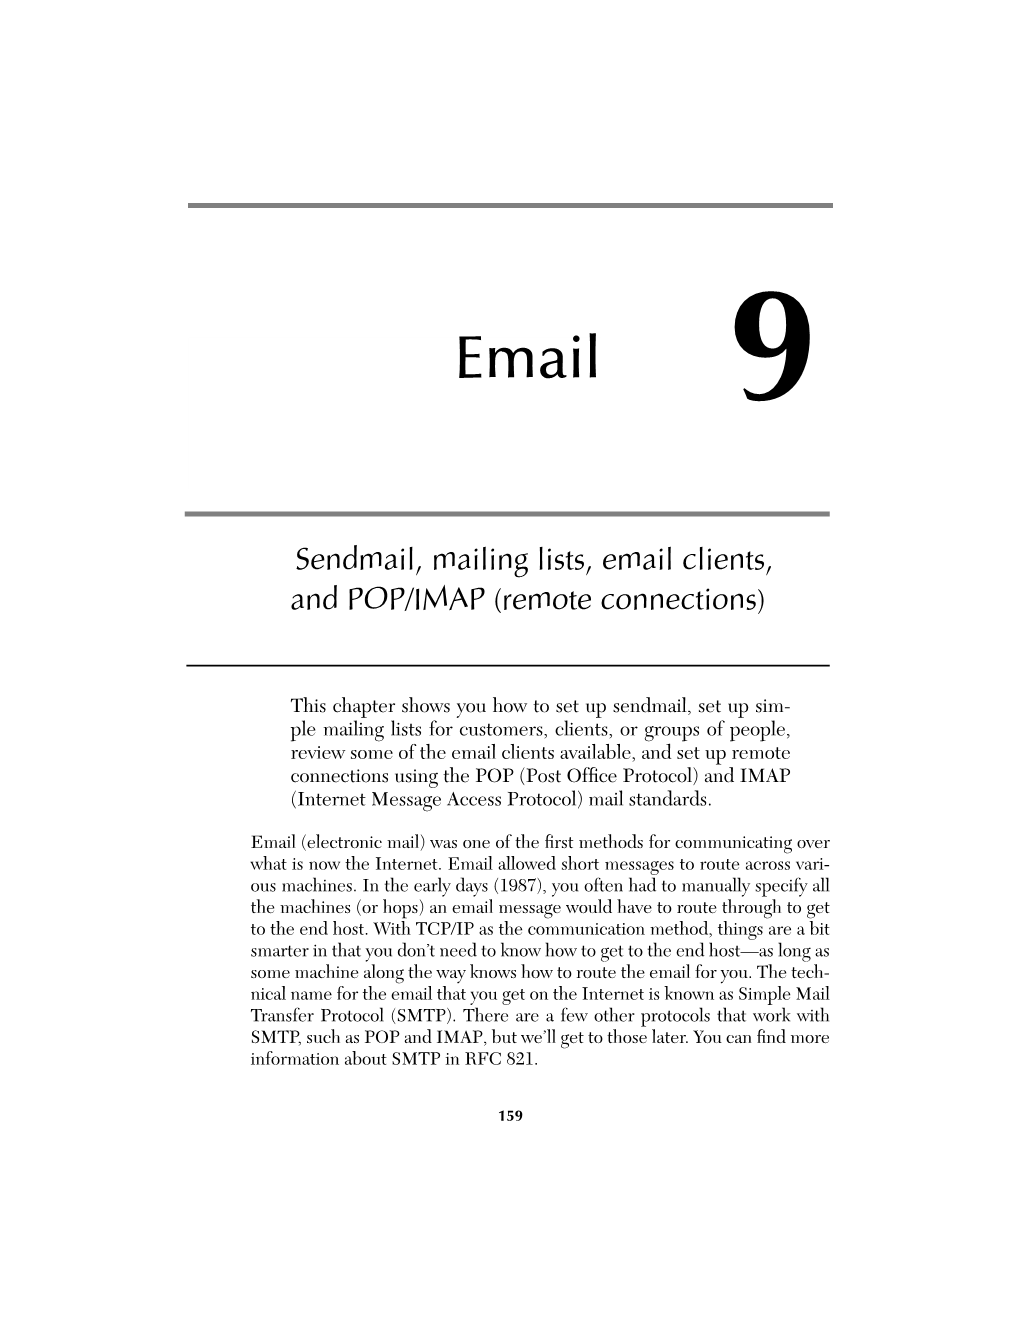 Sendmail, Mailing Lists, Email Clients, and POP/IMAP (Remote Connections)